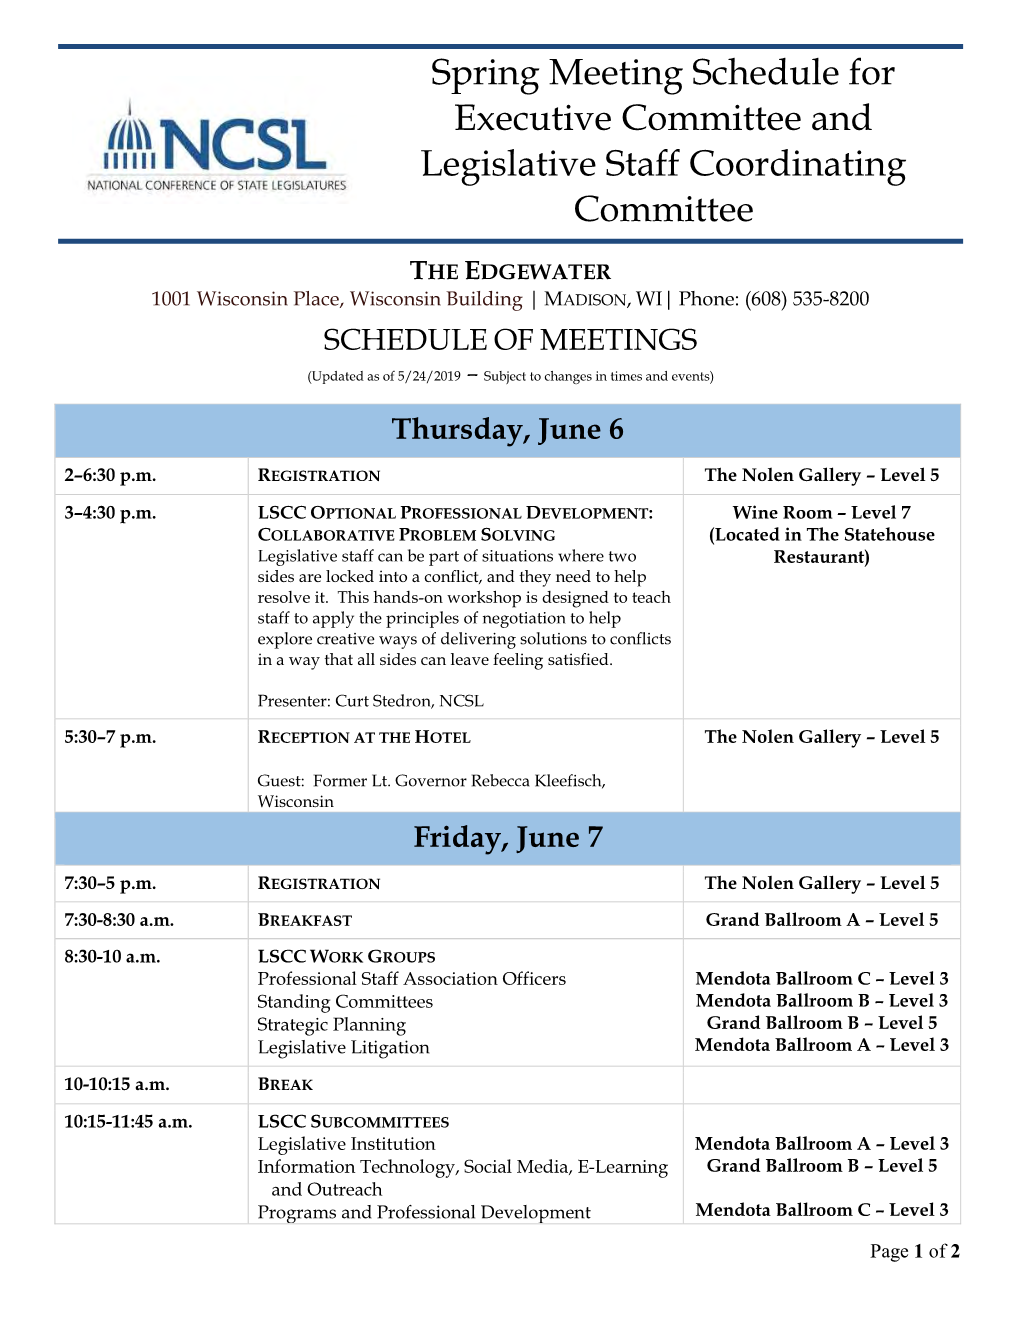 Spring Meeting Schedule for Executive Committee and Legislative Staff Coordinating Committee